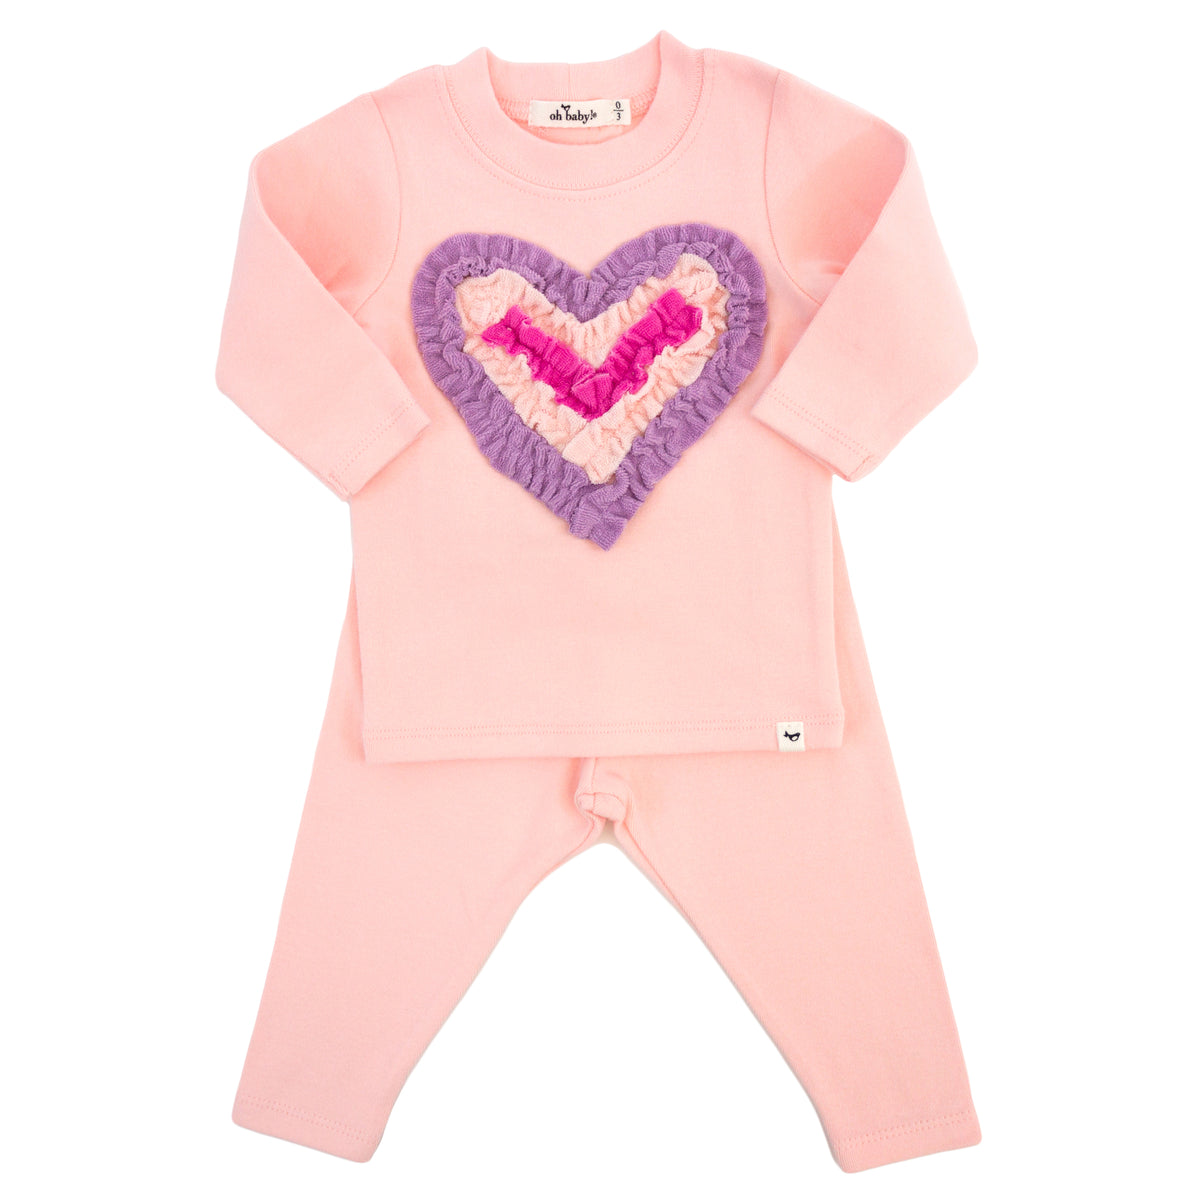 oh baby! Two Piece Set - Multicolor Terry Ruffle Heart Applique - Pale Pink